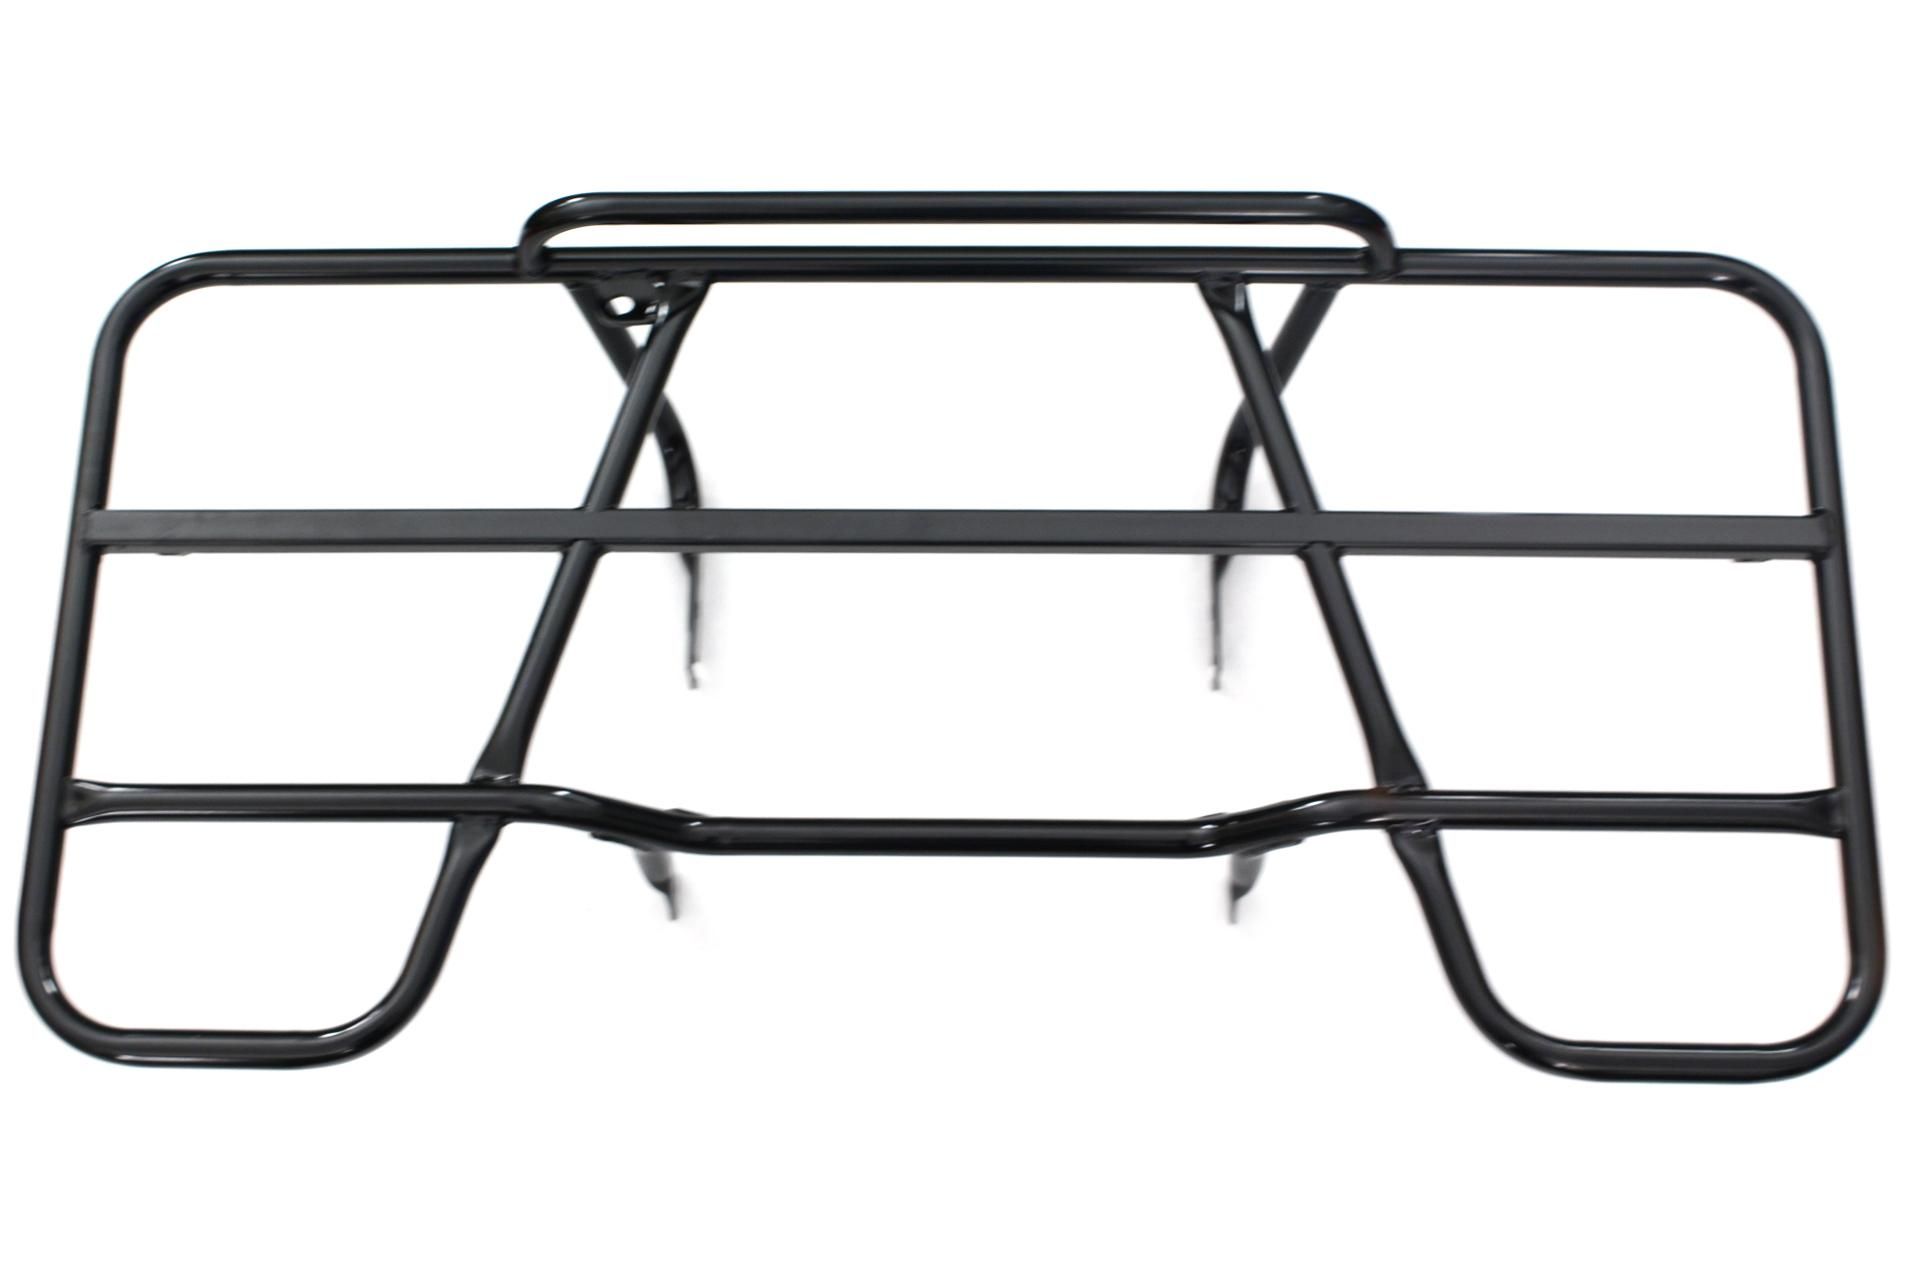 81300-HN2-000 LUGGAGE CARRIER